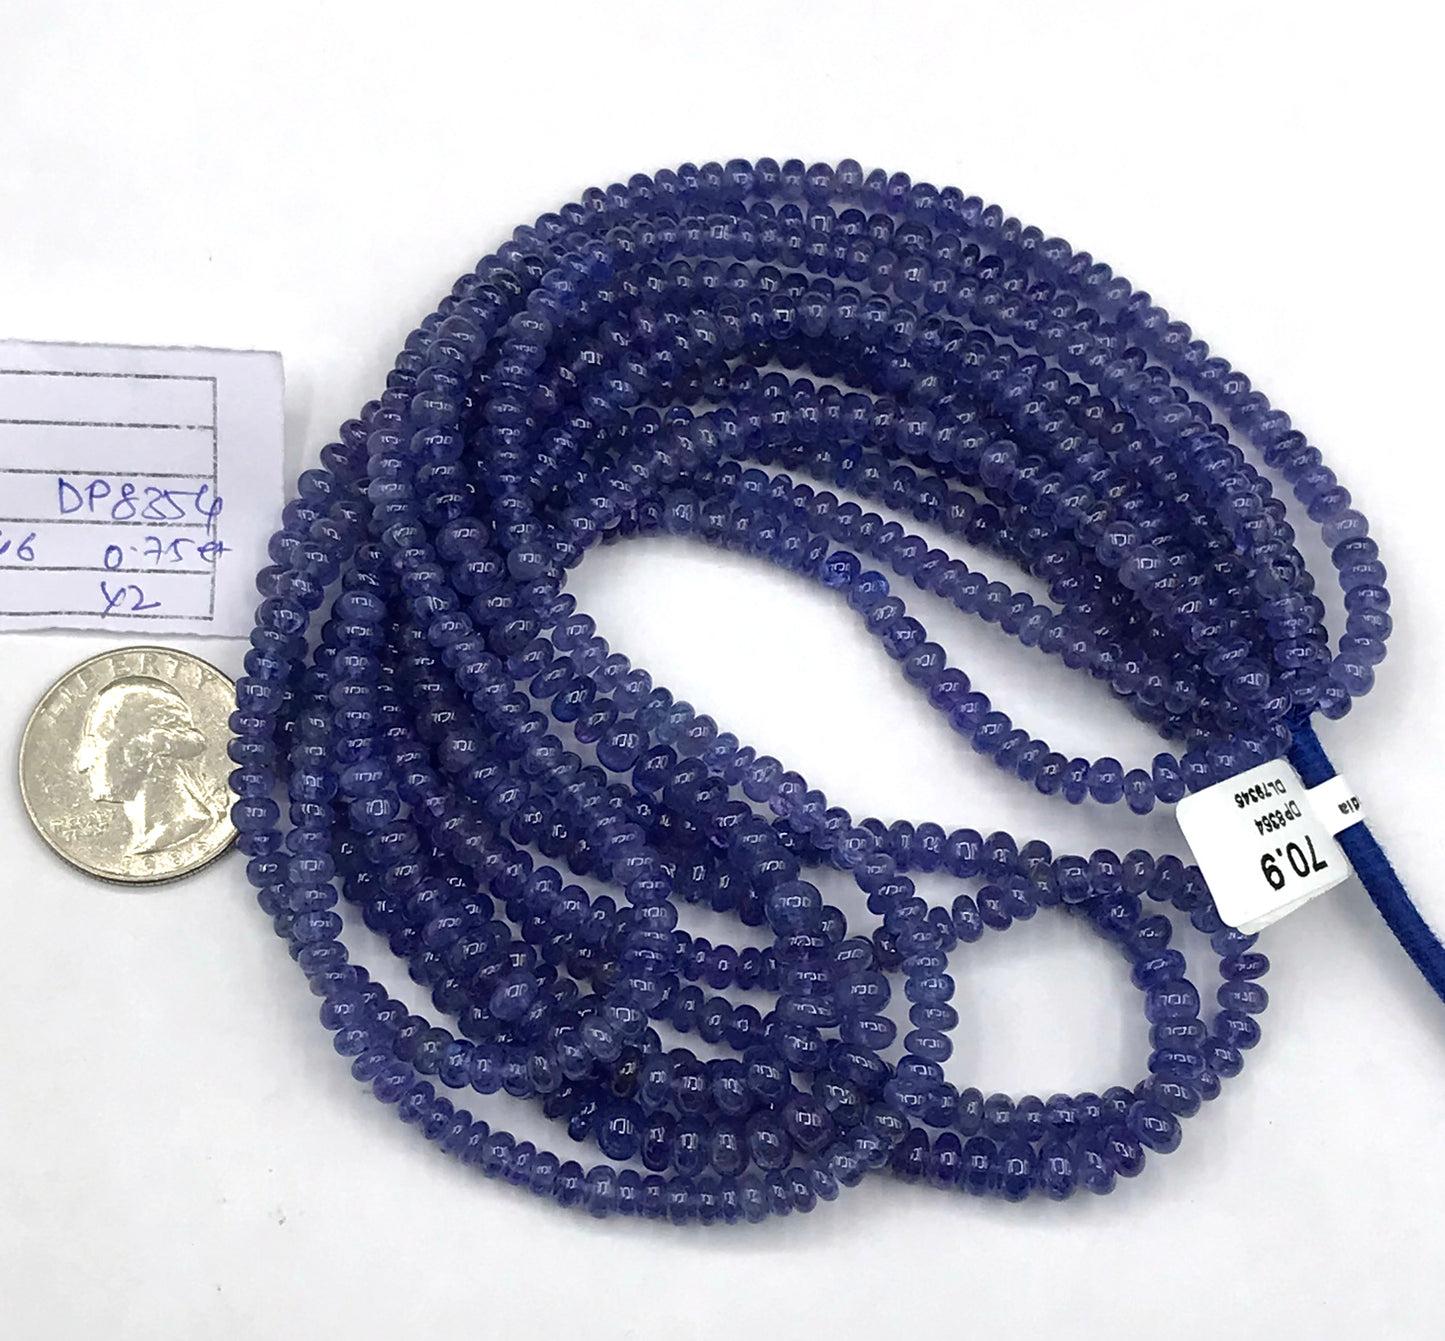 Tanzanian Beads Smooth Rondelle